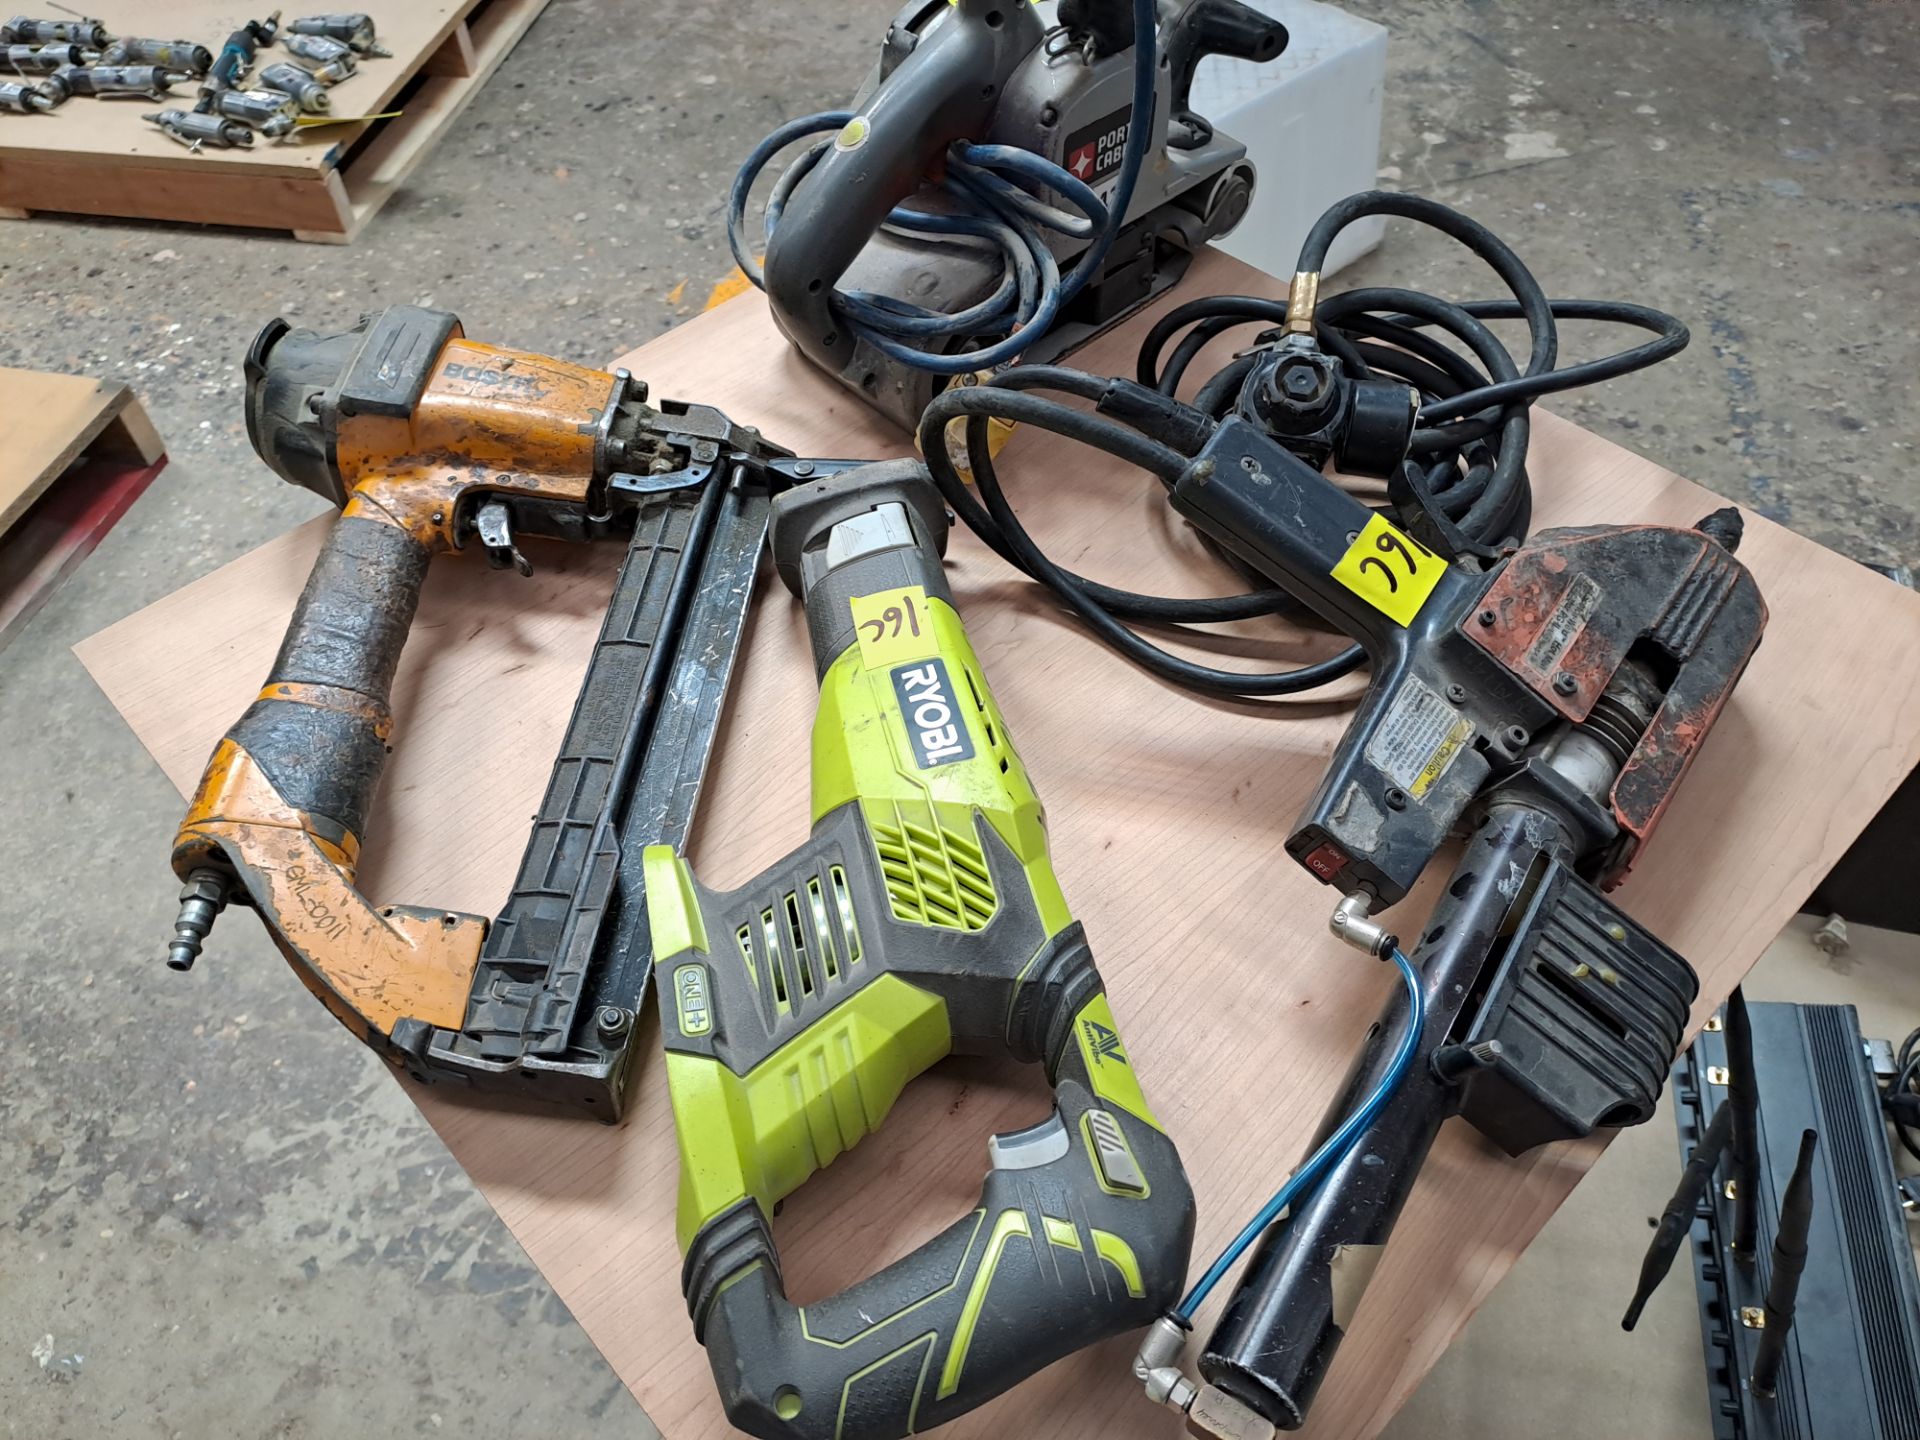 Lot of 4 pieces contains: 1 Porter electric sander with dust collector; 1 Ryobi wood saw without ba - Image 12 of 14